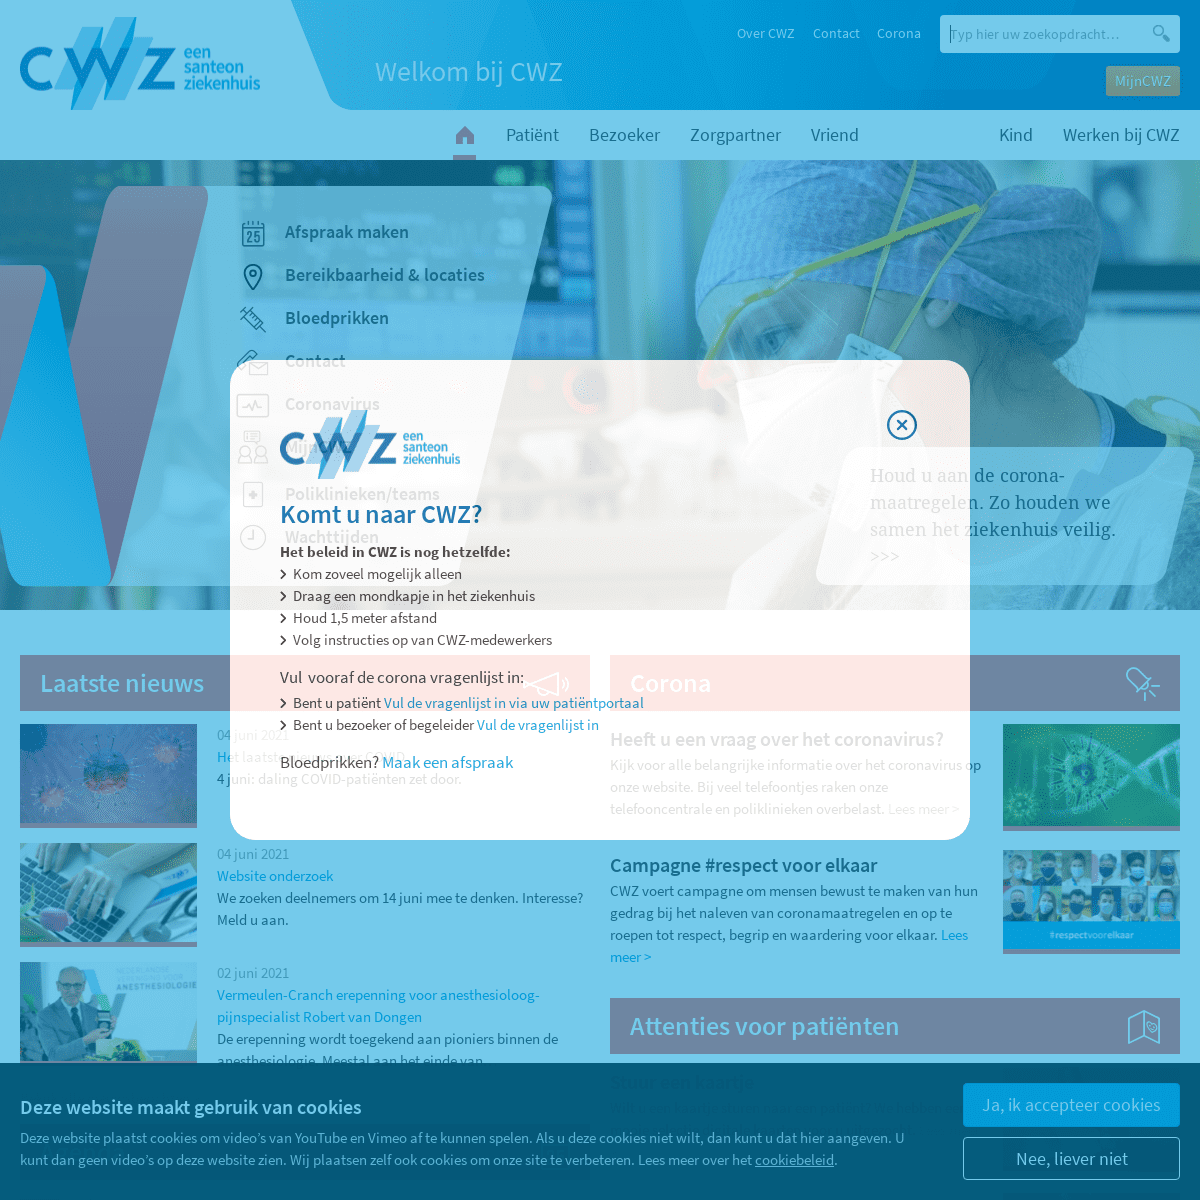 A complete backup of https://cwz.nl